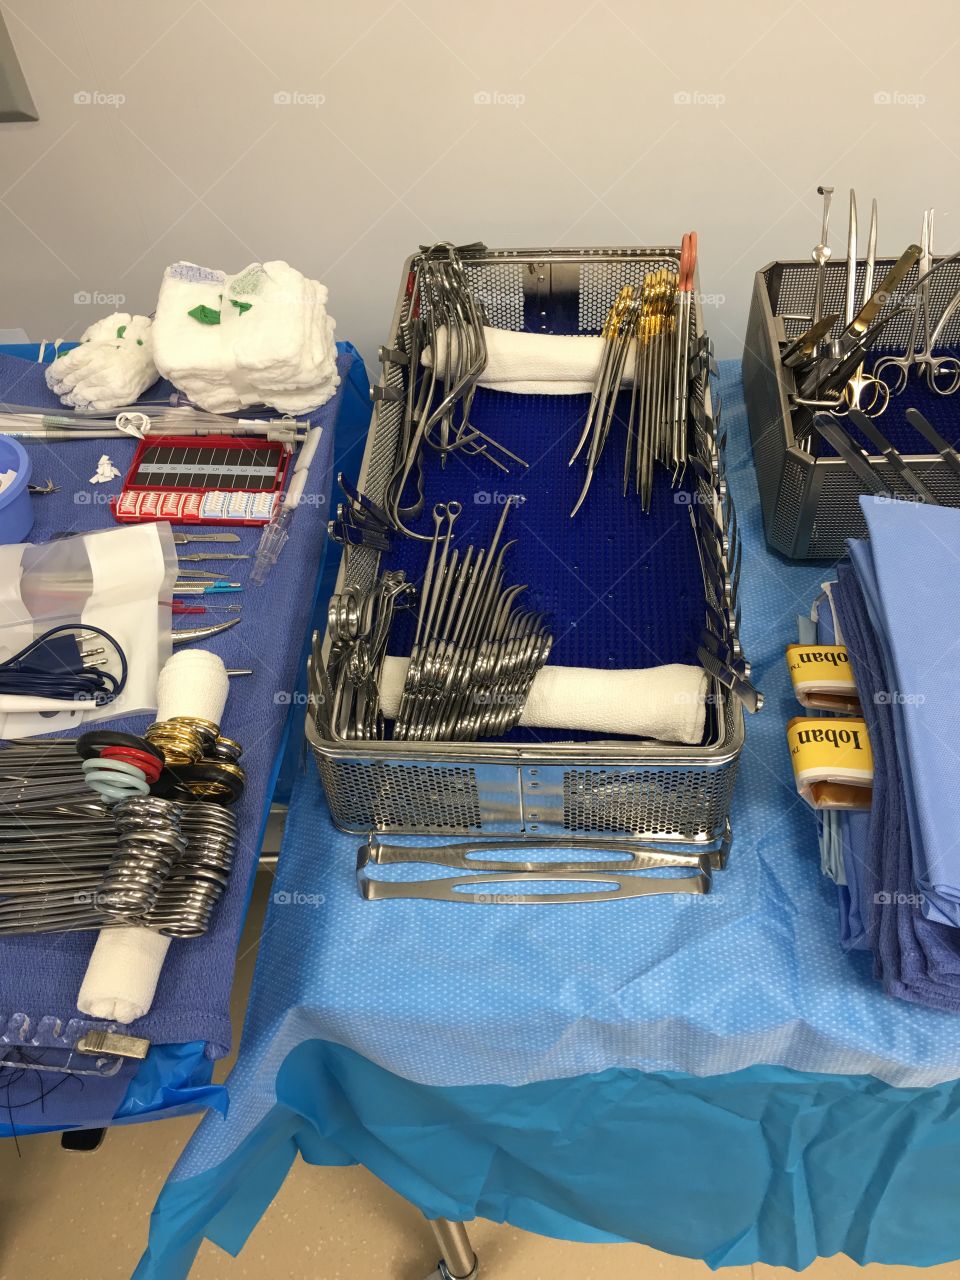 Day in the life of a surgical technologist